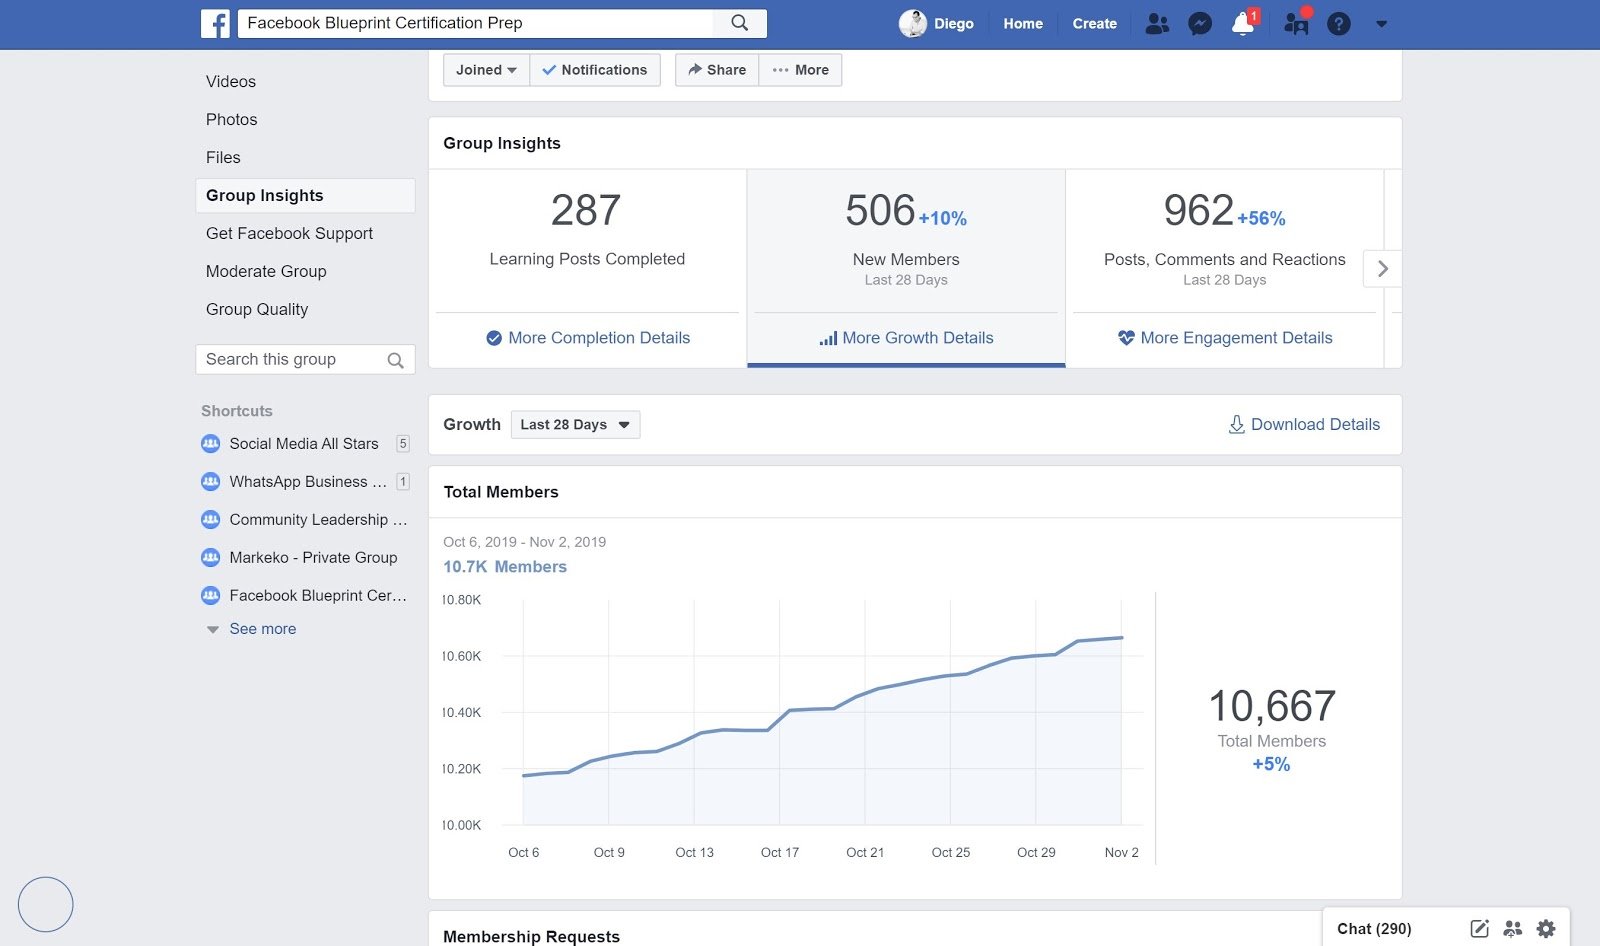 how-i-started-a-4k-month-blog-that-helps-people-get-facebook-blueprint-certifications